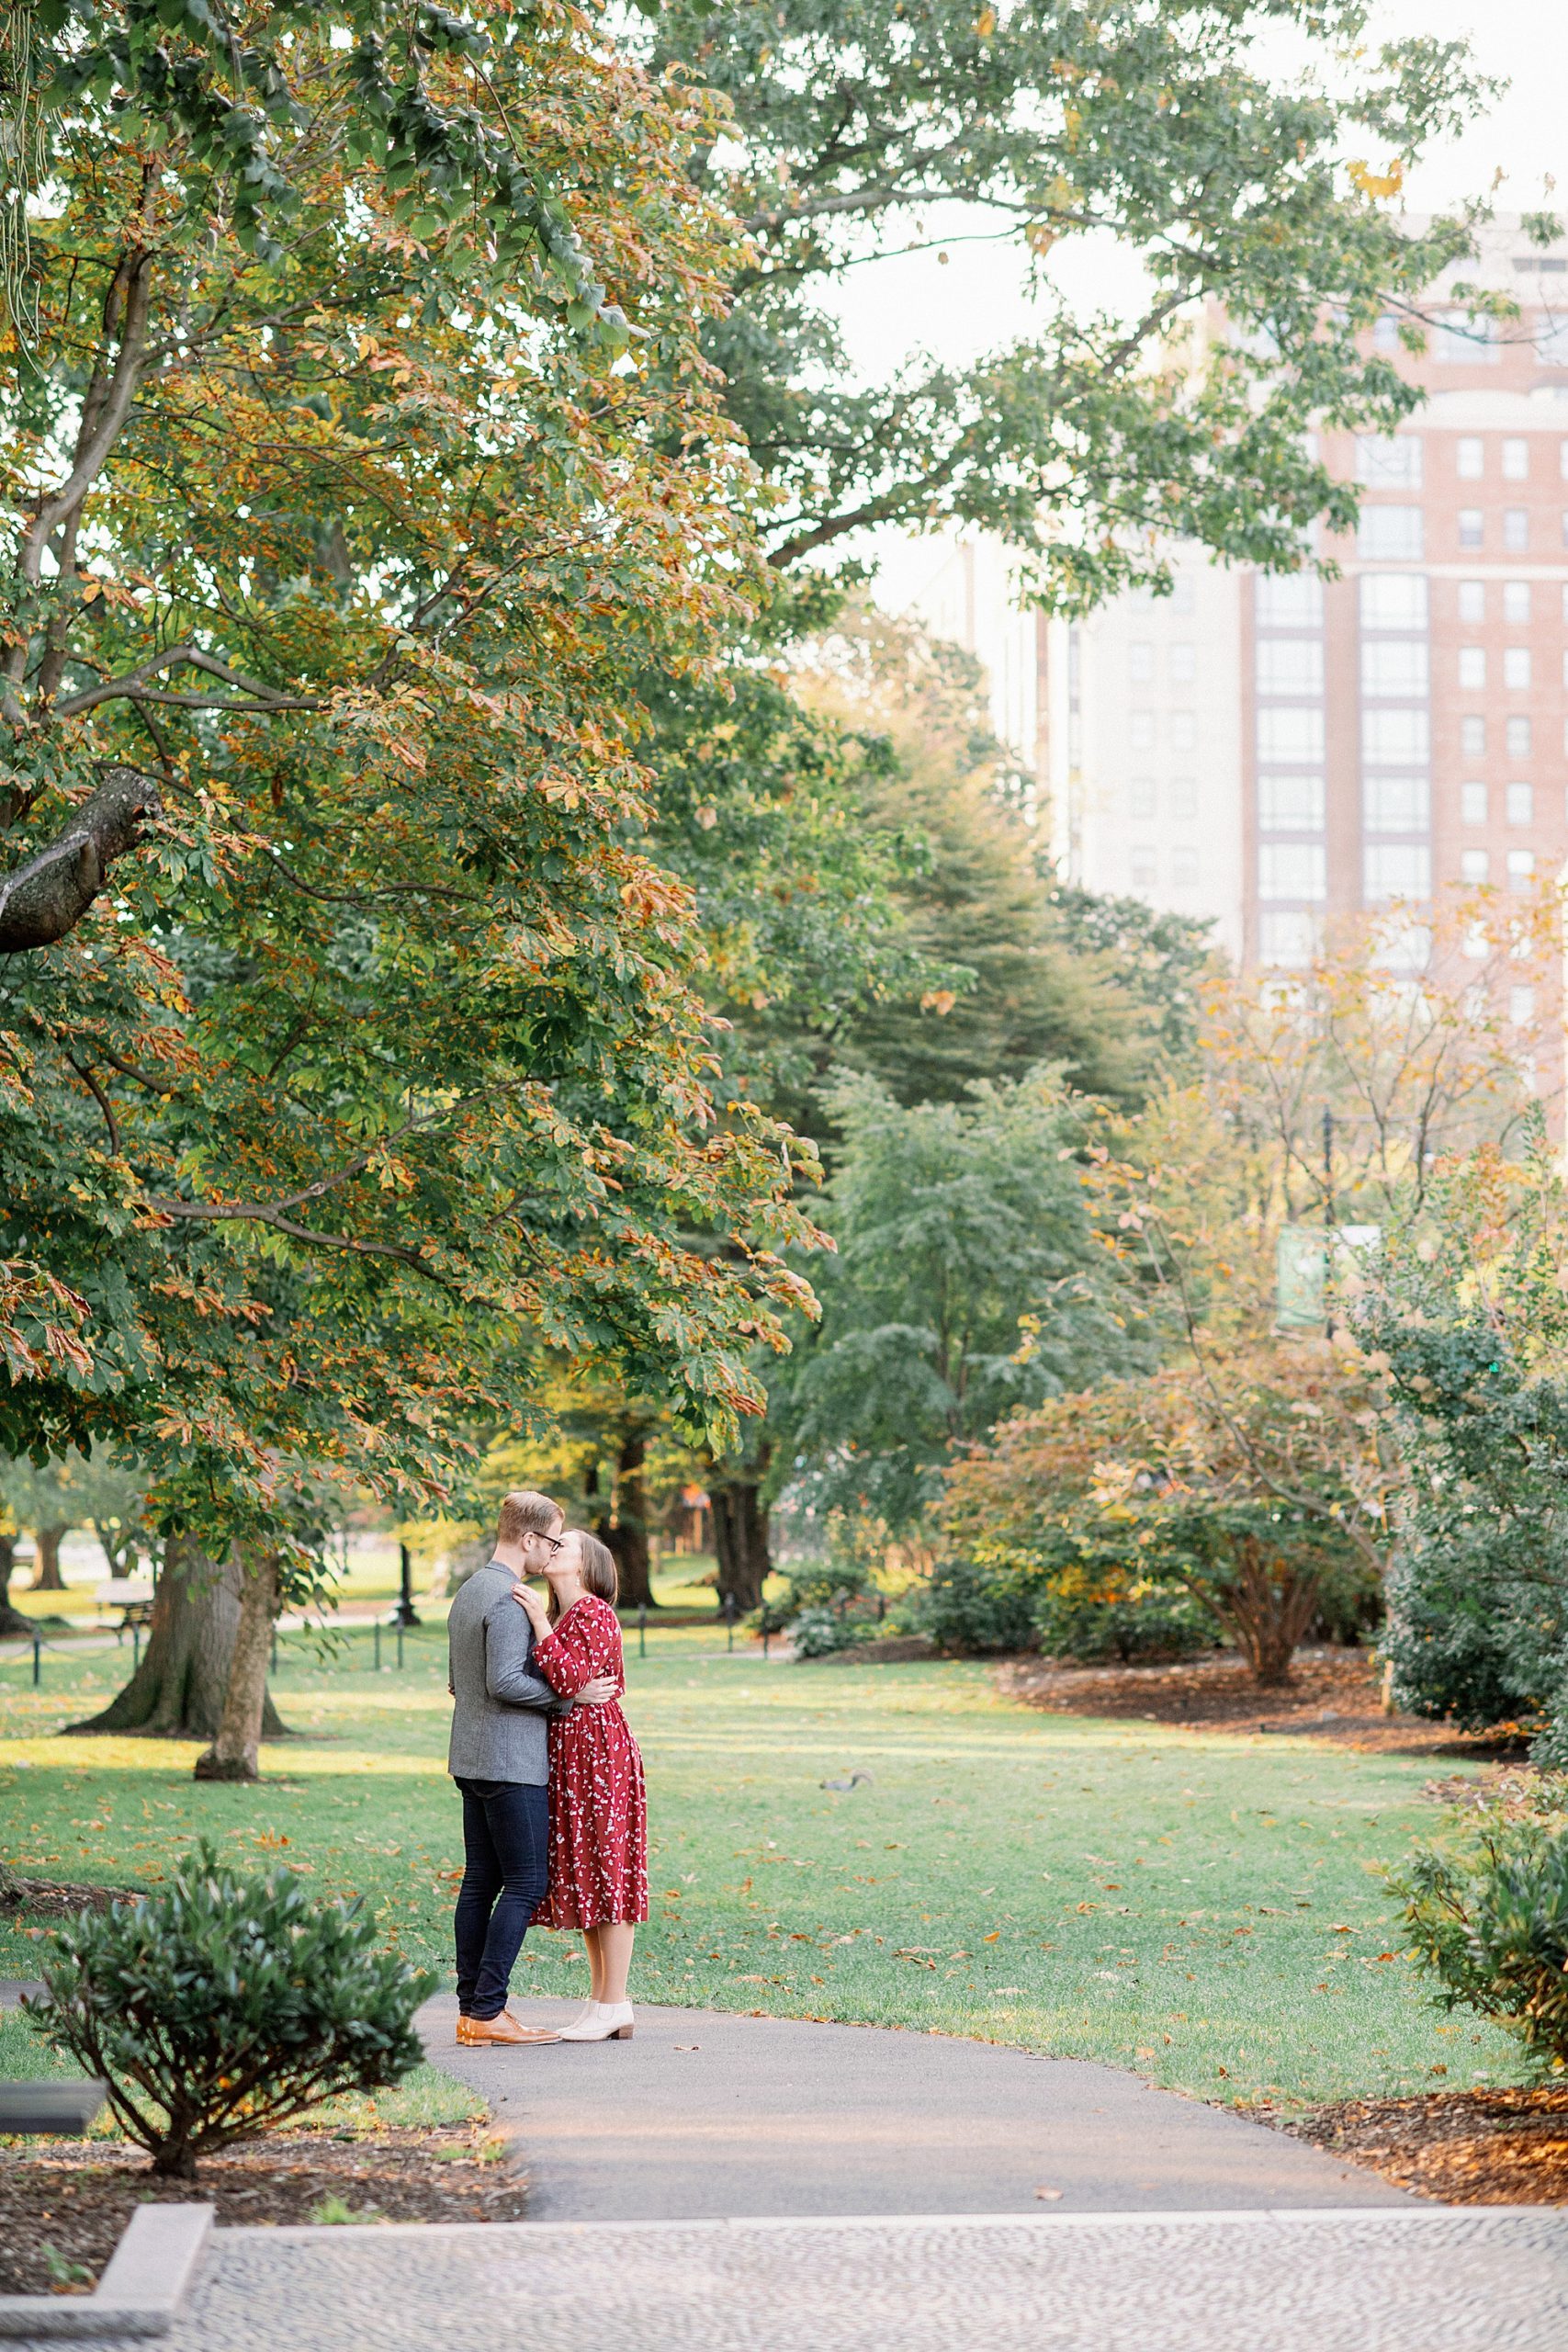 Boston Public Garden engagement session on film at sunrise Fall in New England